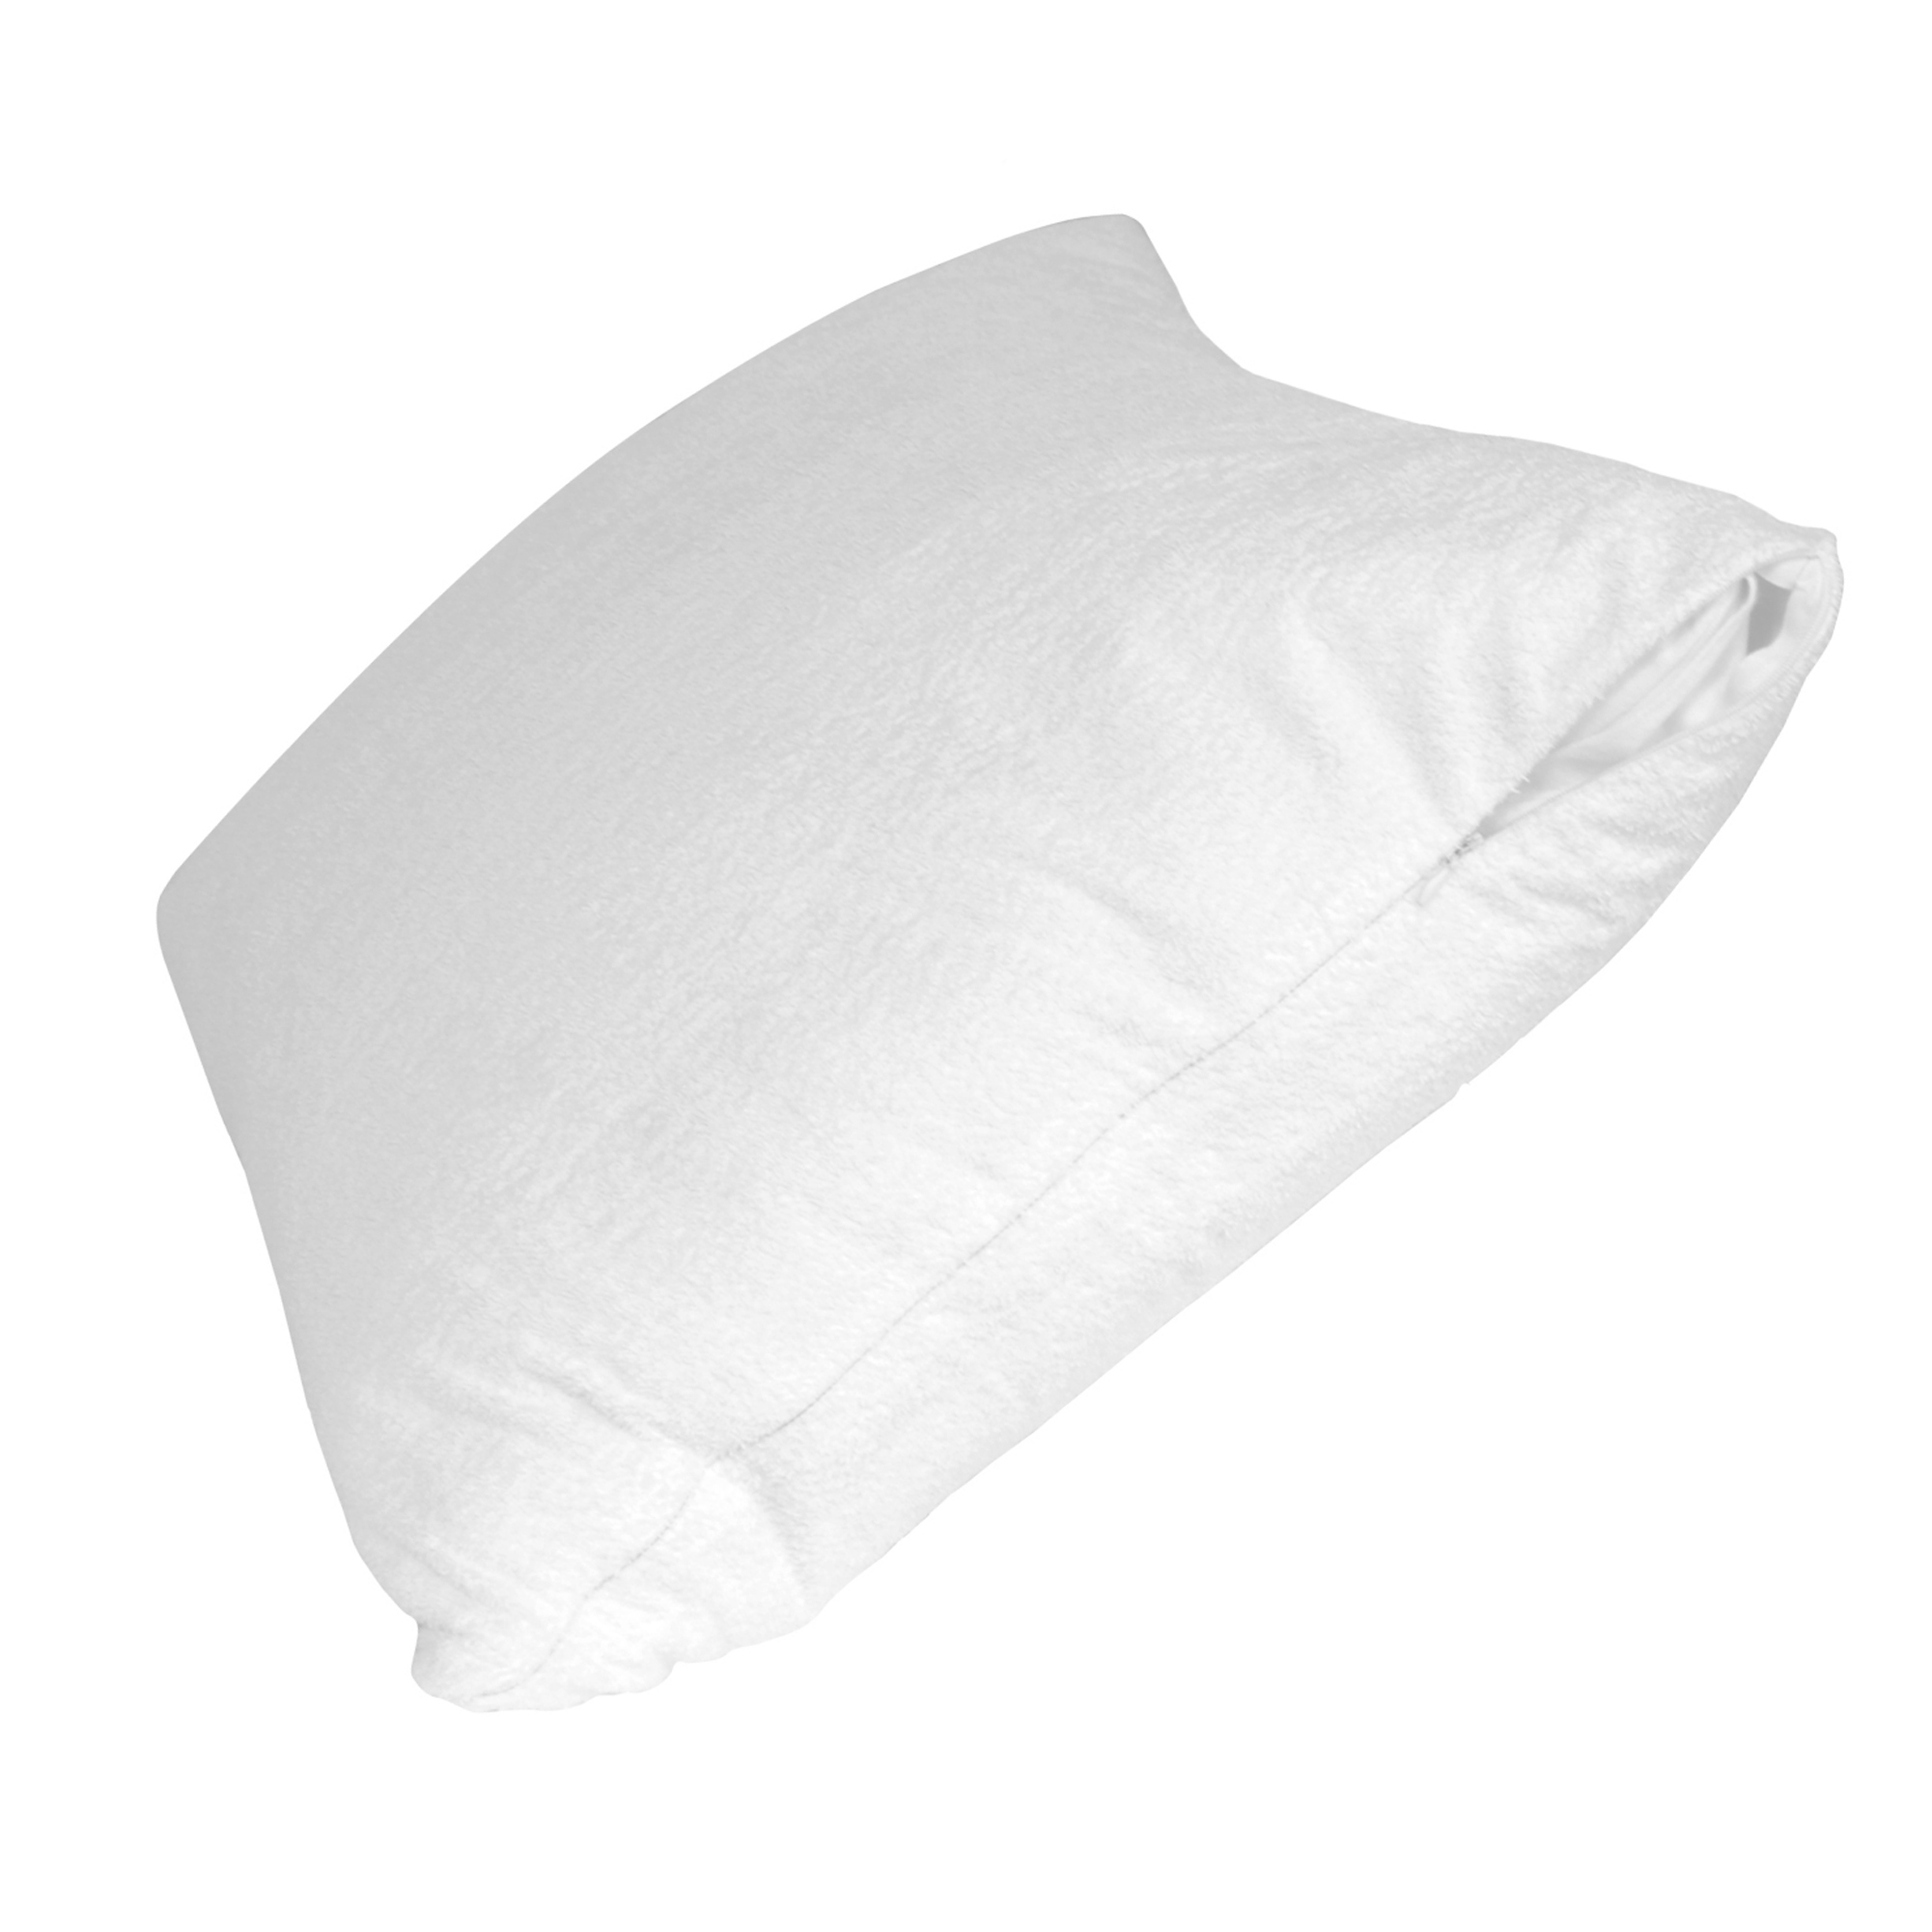 Pacific Coast Restful Nights Essential Pillow Protector Super Standard Size